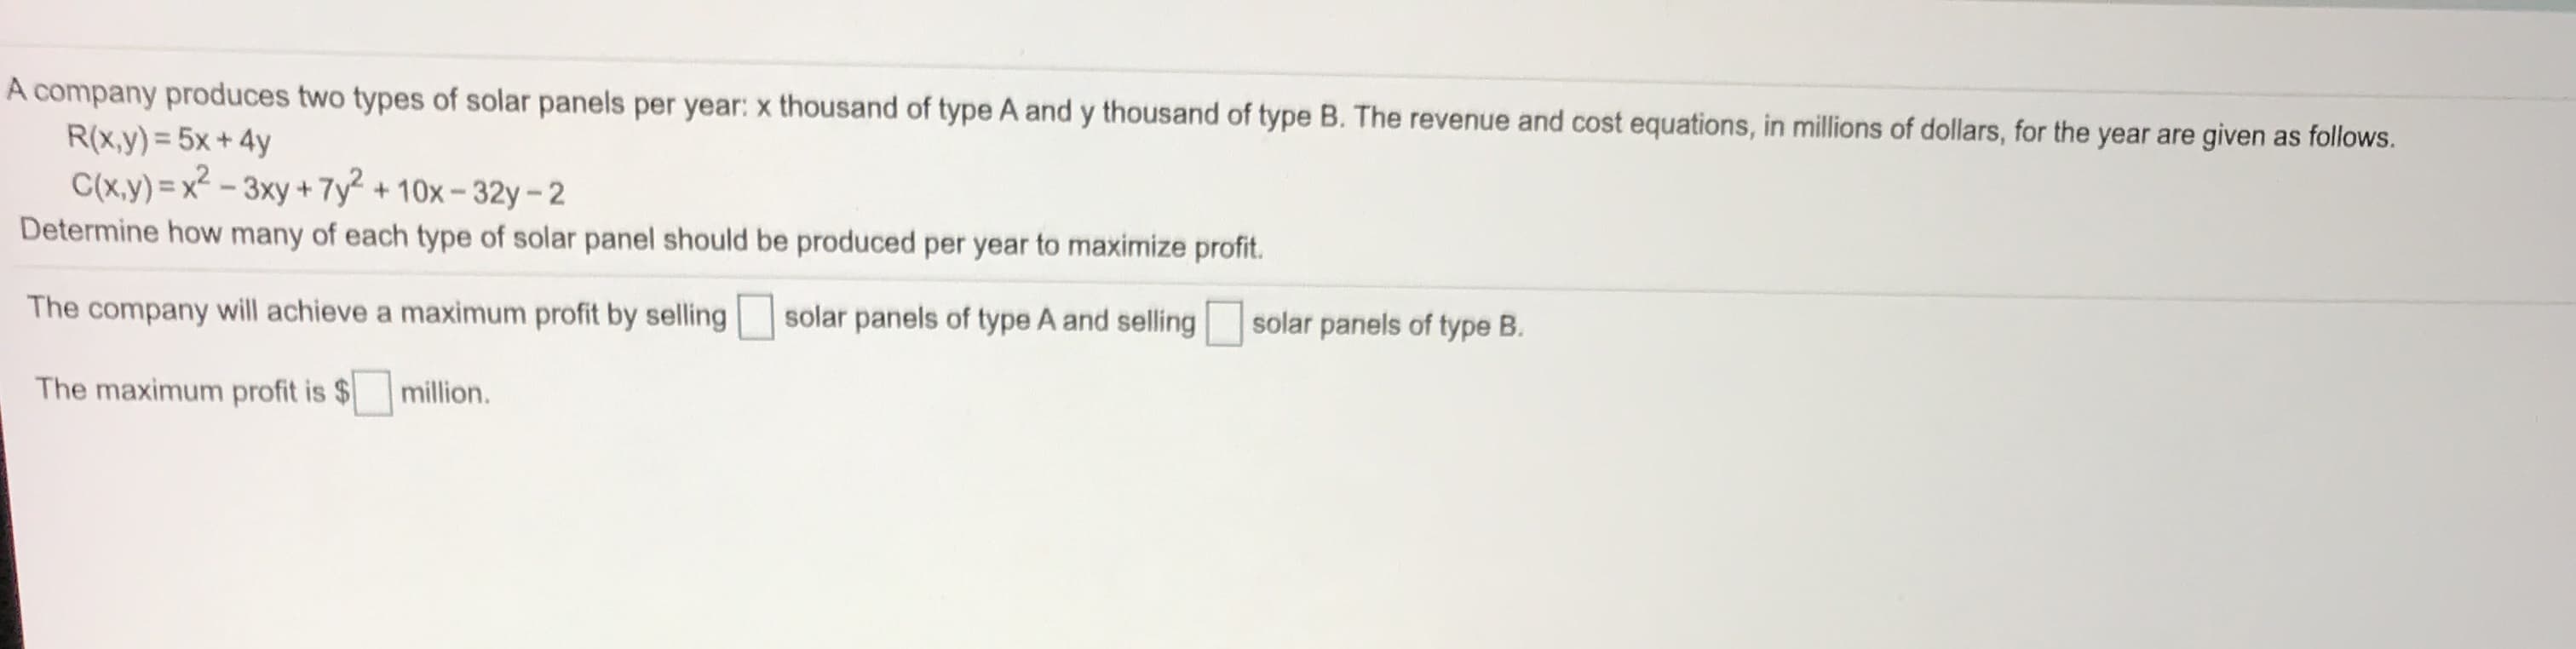 A company produces two types of solar panels per year: x thousand of type A and y thousand of type B. The revenue and cost equations, in millions of dollars, for the year are given as follows.
R(x,y) = 5x + 4y
C(x.y) = x² - 3xy + 7y² + 10x-32y-2
Determine how many of each type of solar panel should be produced per year to maximize profit.
The company will achieve a maximum profit by selling
solar panels of type A and selling
solar panels of type B.
The maximum profit is $
million.
